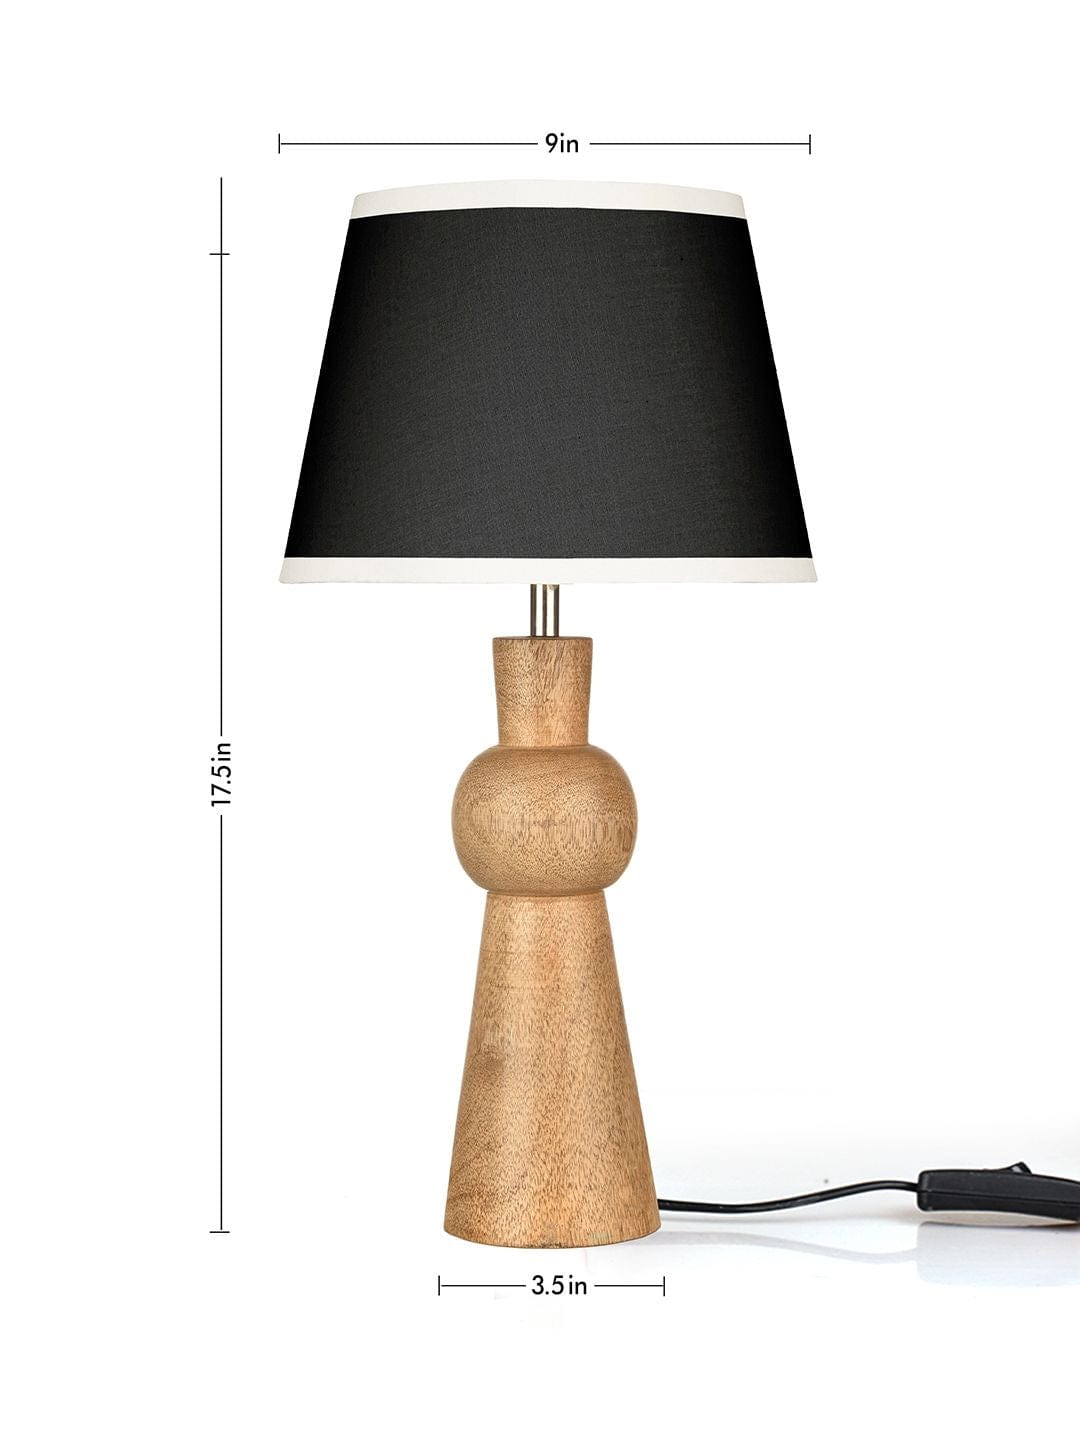 Wooden Skirt Lamp with White Black Shade